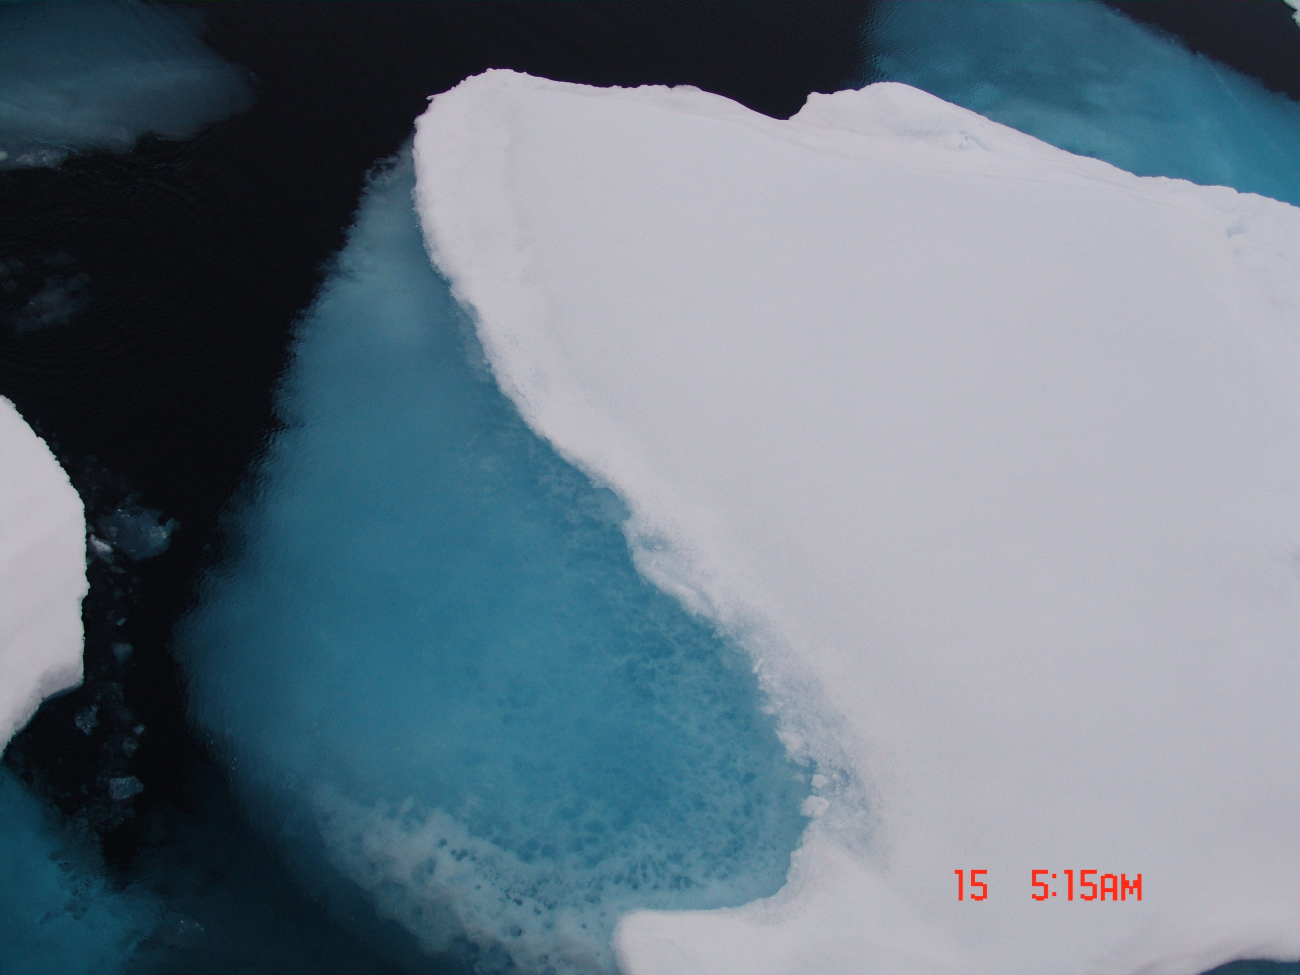 Honeycomb pattern in subsurface ice is indicative of melting and deteriorationof ice floe